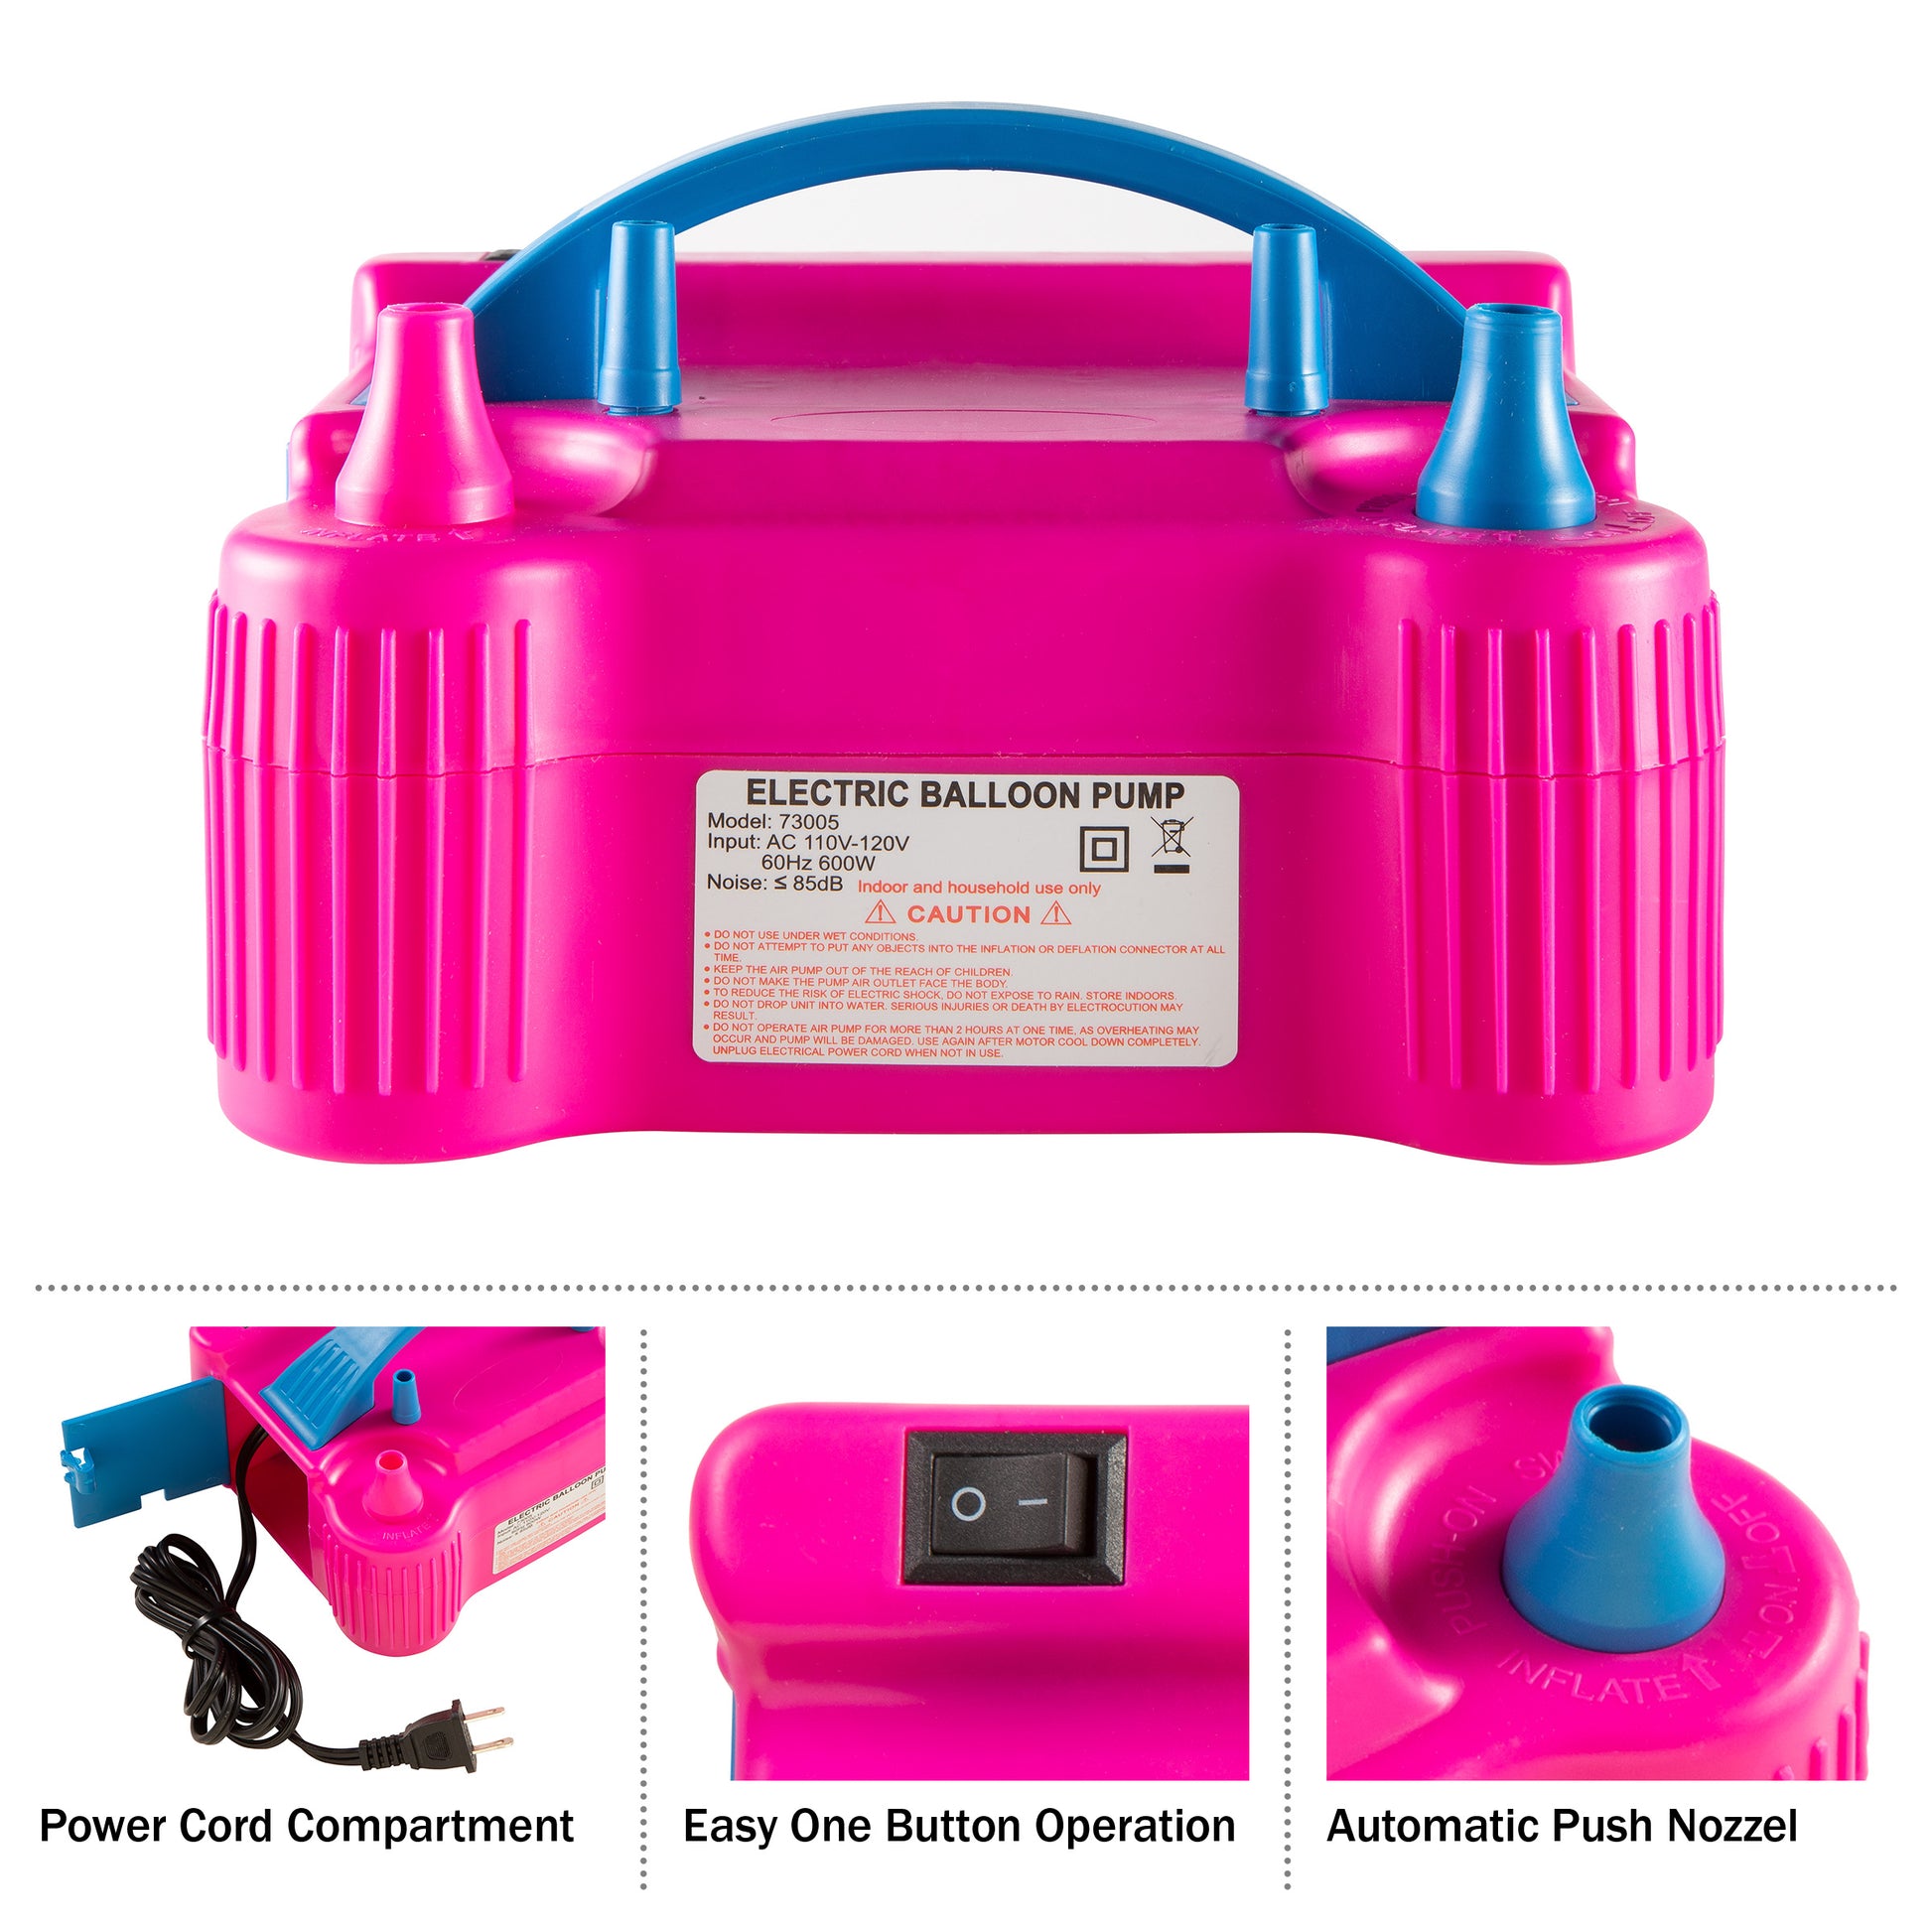 Electric Balloon Pump - Inflates Balloons in 3 Seconds - Lightweight and Portable Balloon Inflator by Great Northern Popcorn (Pink)